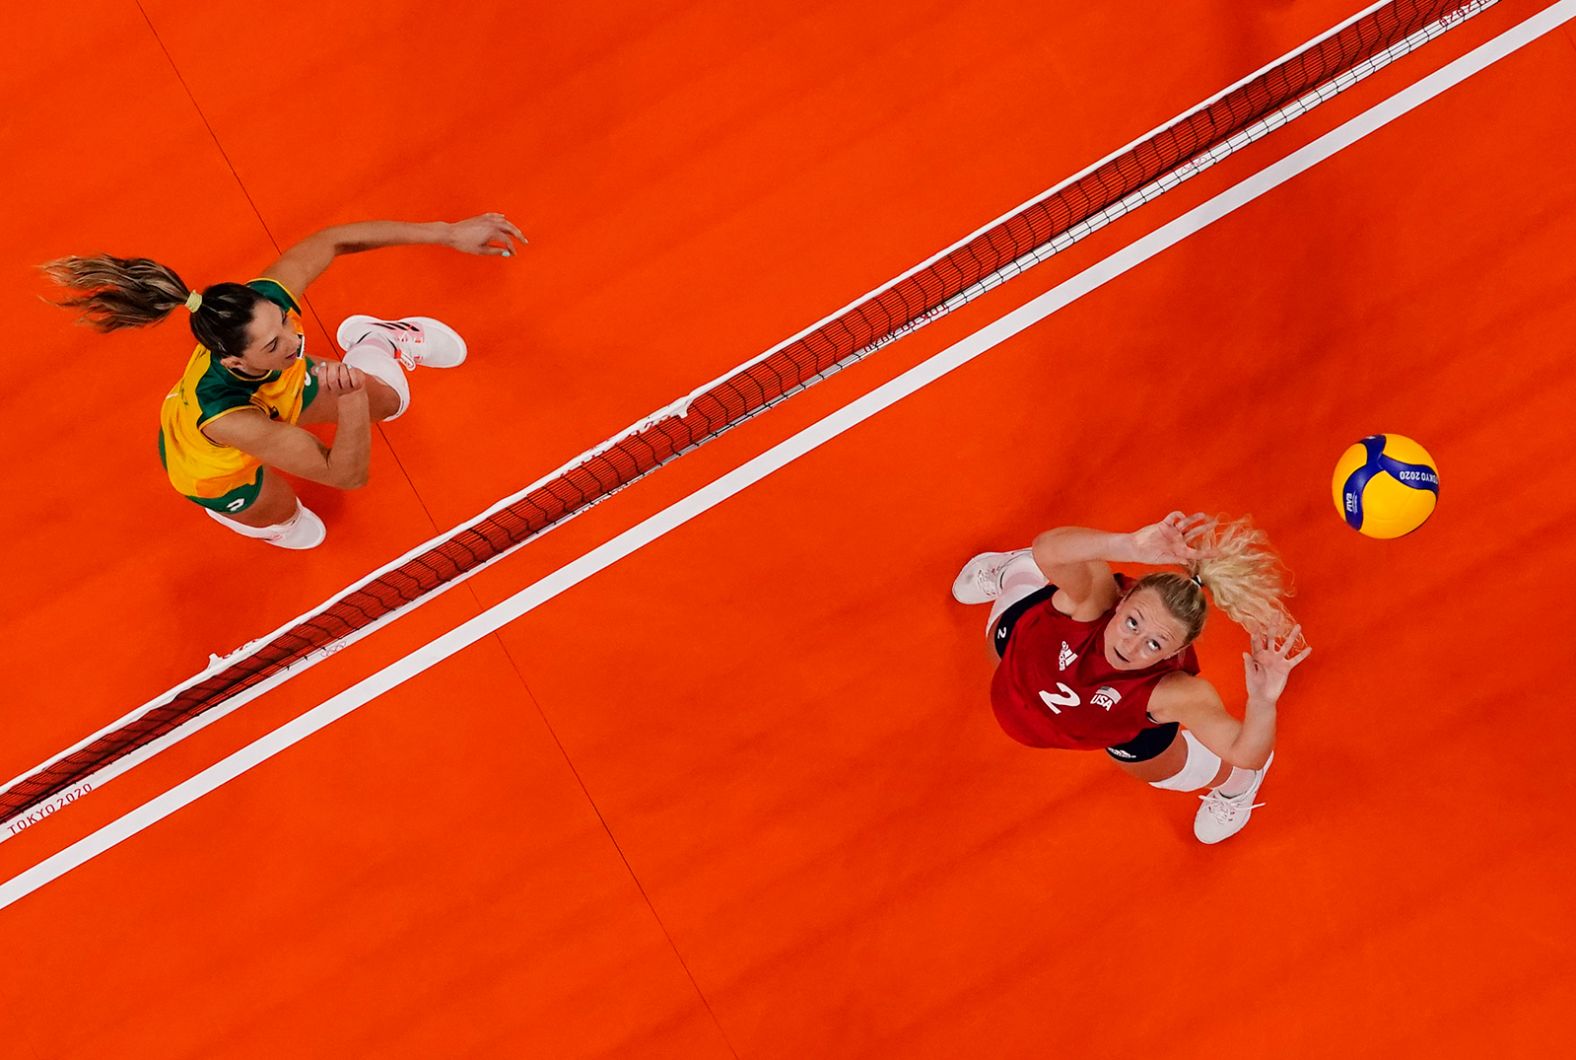 The United States' Jordyn Poulter, right, sets the ball during <a href="index.php?page=&url=https%3A%2F%2Fwww.cnn.com%2Fworld%2Flive-news%2Ftokyo-2020-olympics-08-08-21-spt%2Fh_1307b067886f6129d5a535fad820afdc" target="_blank">the gold-medal volleyball match</a> against Brazil on August 8. The Americans defeated Brazil 3-0. It is the United States' first-ever gold medal in women's volleyball.